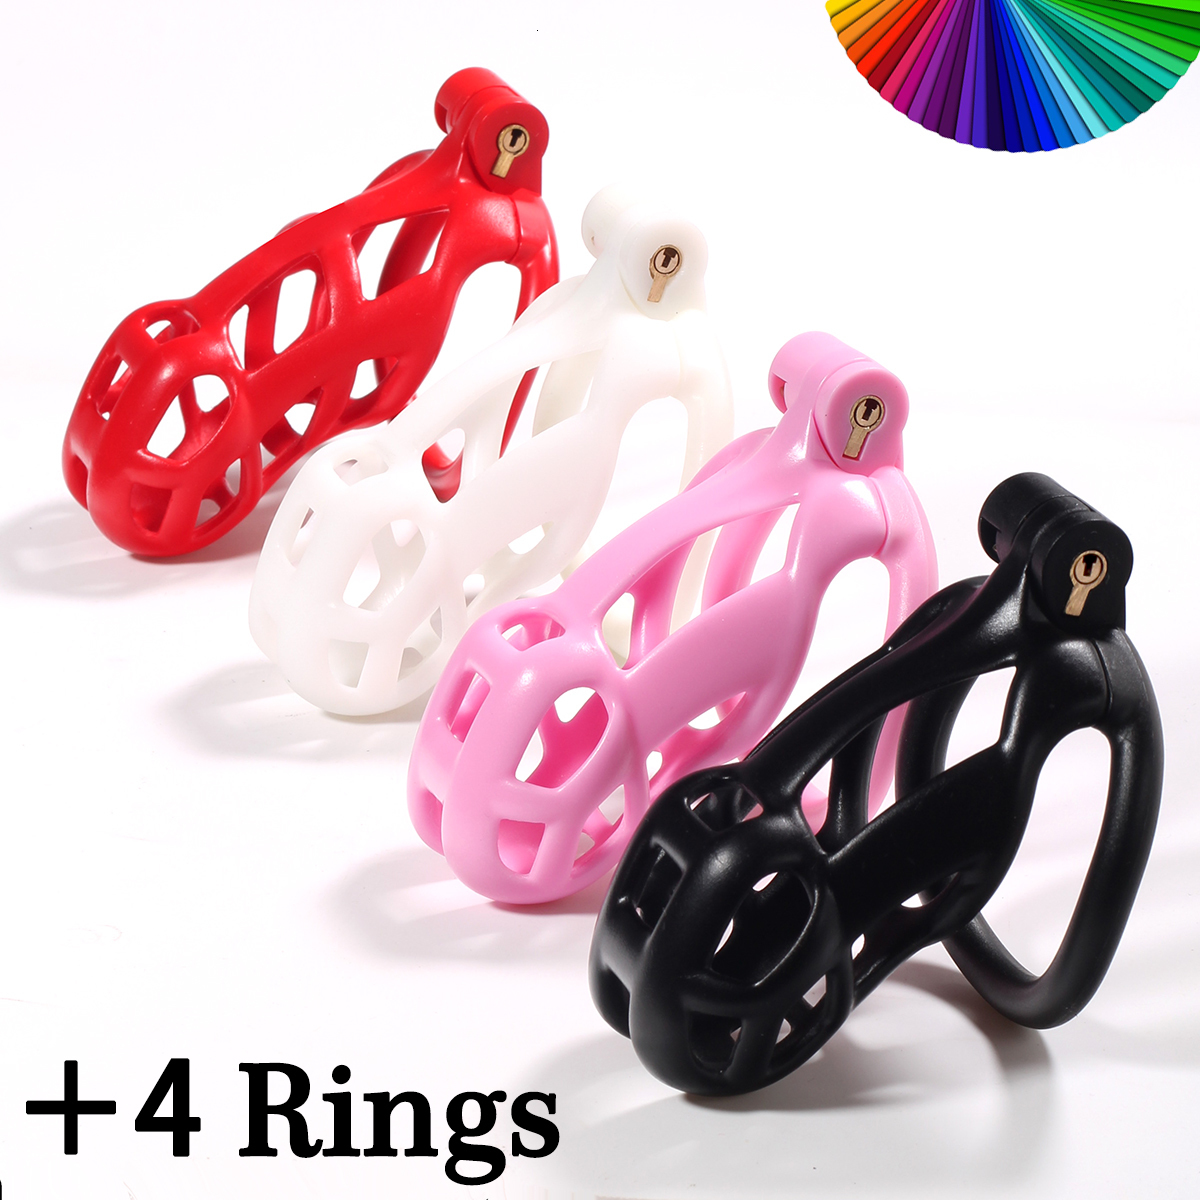 

Cockrings Curved Male Cobra Chastity Device Kit Sex Toys For Men Cock Cage Penis Ring Plastic holy trainer BDSM Adult Games Sex Shop 230202